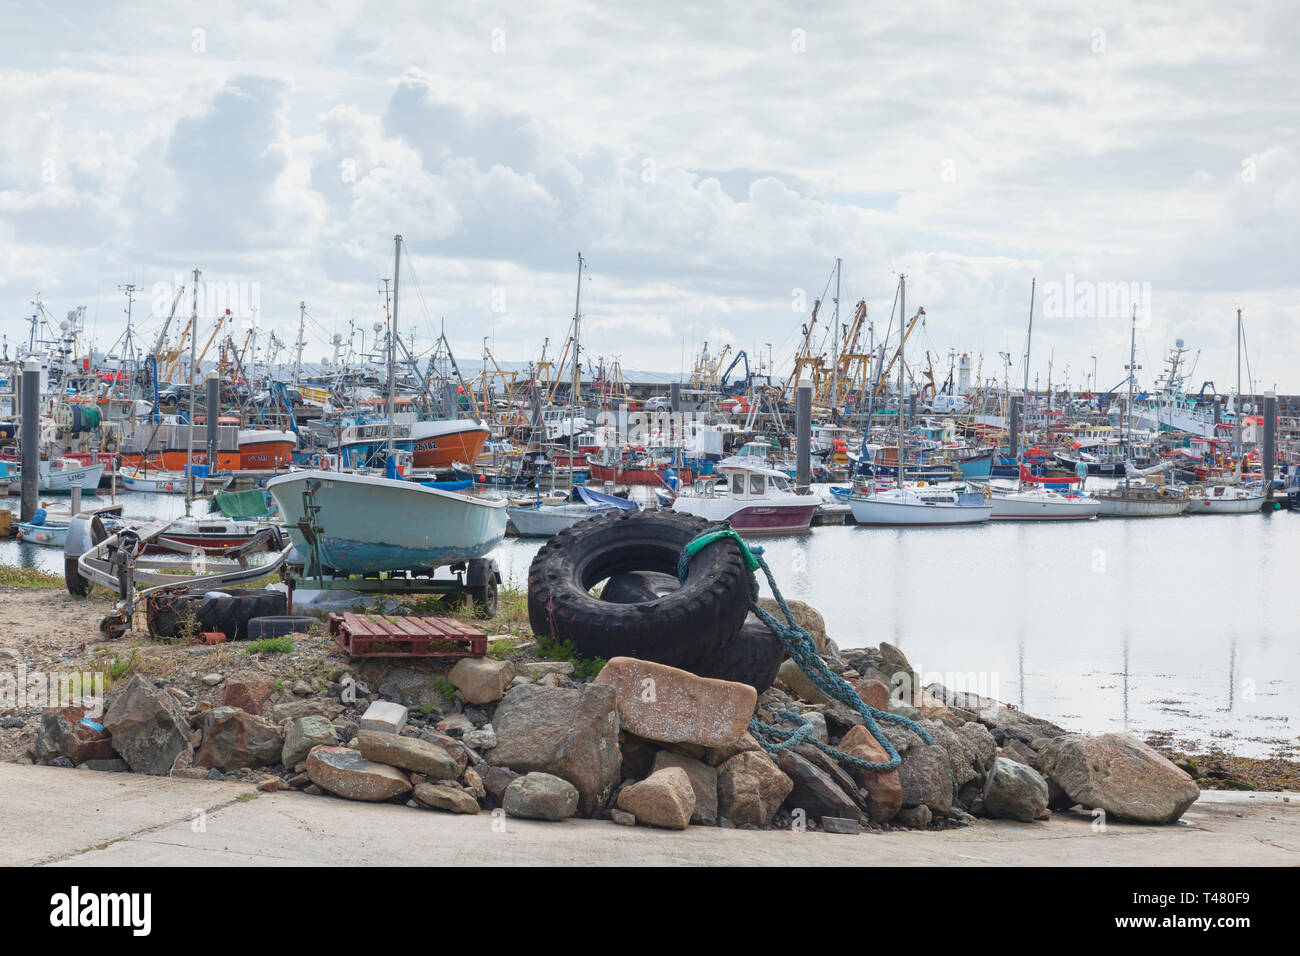 15 June 2018: Newlyn, Cornwall, UK - The fishing port and seaside town. in south west Cornwall. Stock Photo